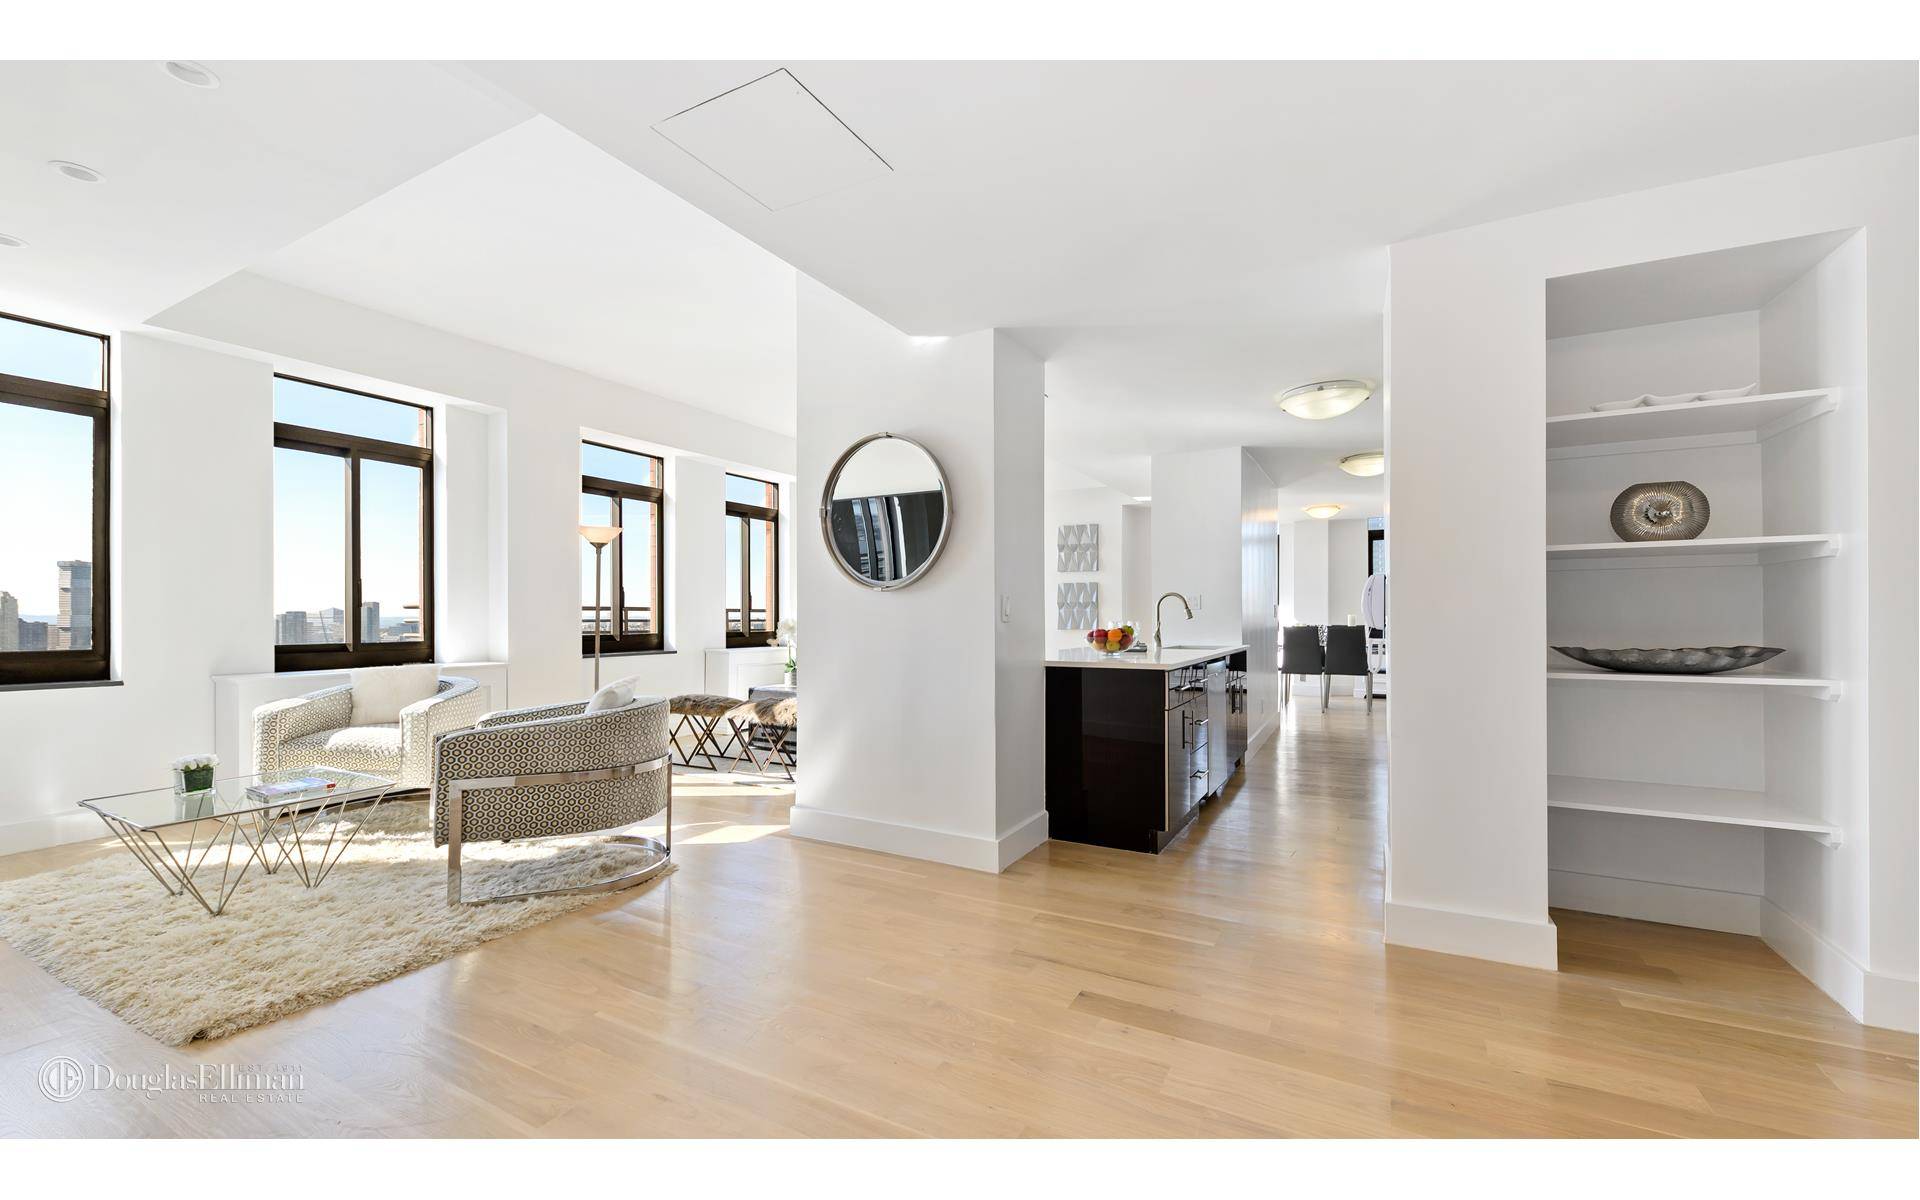 Liberty Court is a full service, 46 story residential tower, comprised of 545 residences including studio, one bedroom, two bedroom, and three bedroom condominiums with unrivaled views of Lower Manhattan, ...